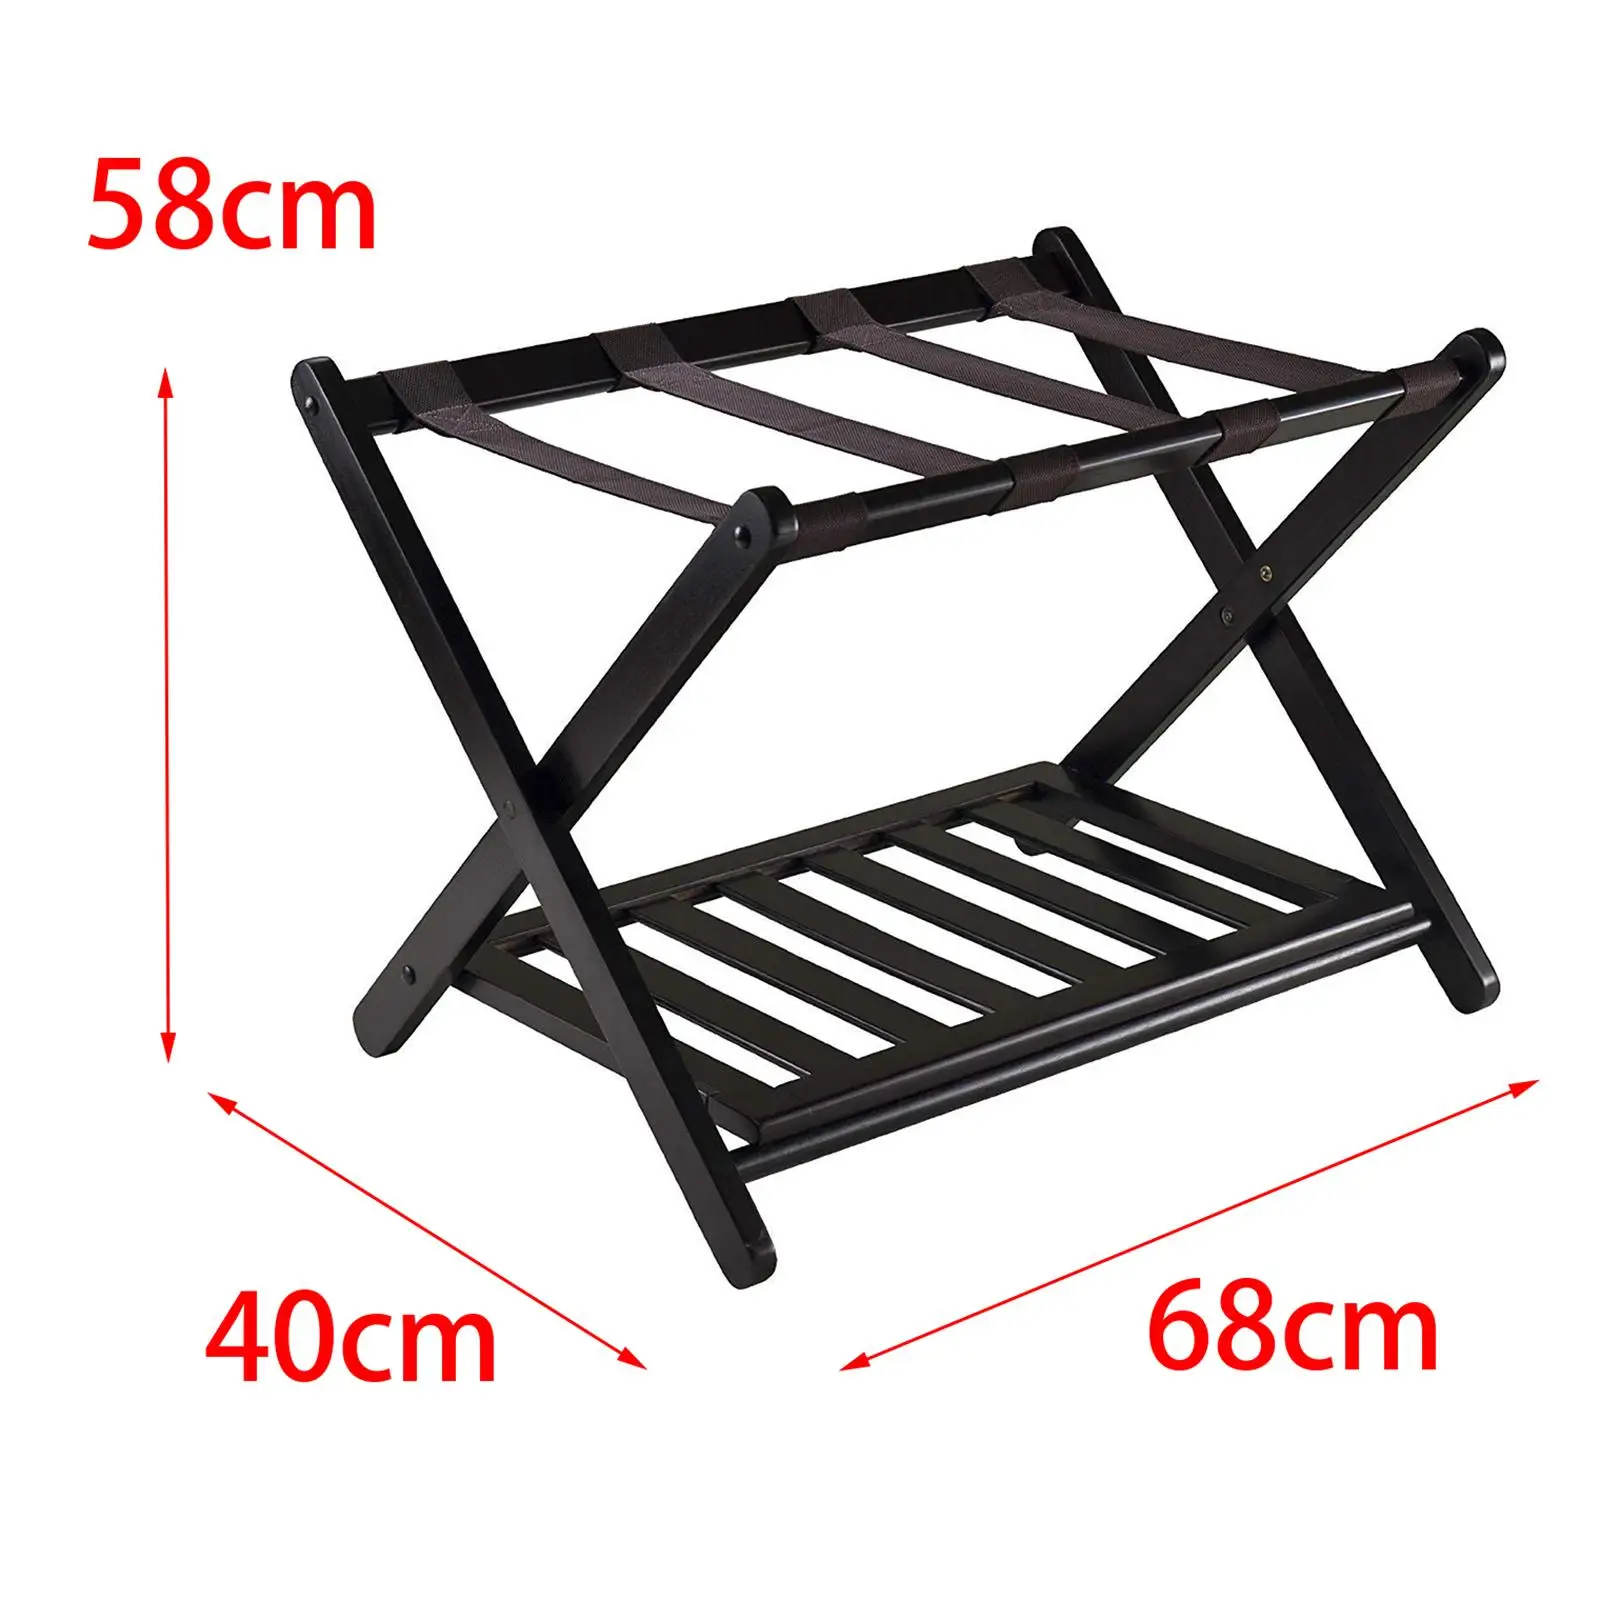 Luggage Rack Floor Standing with Shoes Shelf Suitcase Stand for Hotel Travel Home Heavy Duty Extra Wide Shelf Shoes Guest images - 6